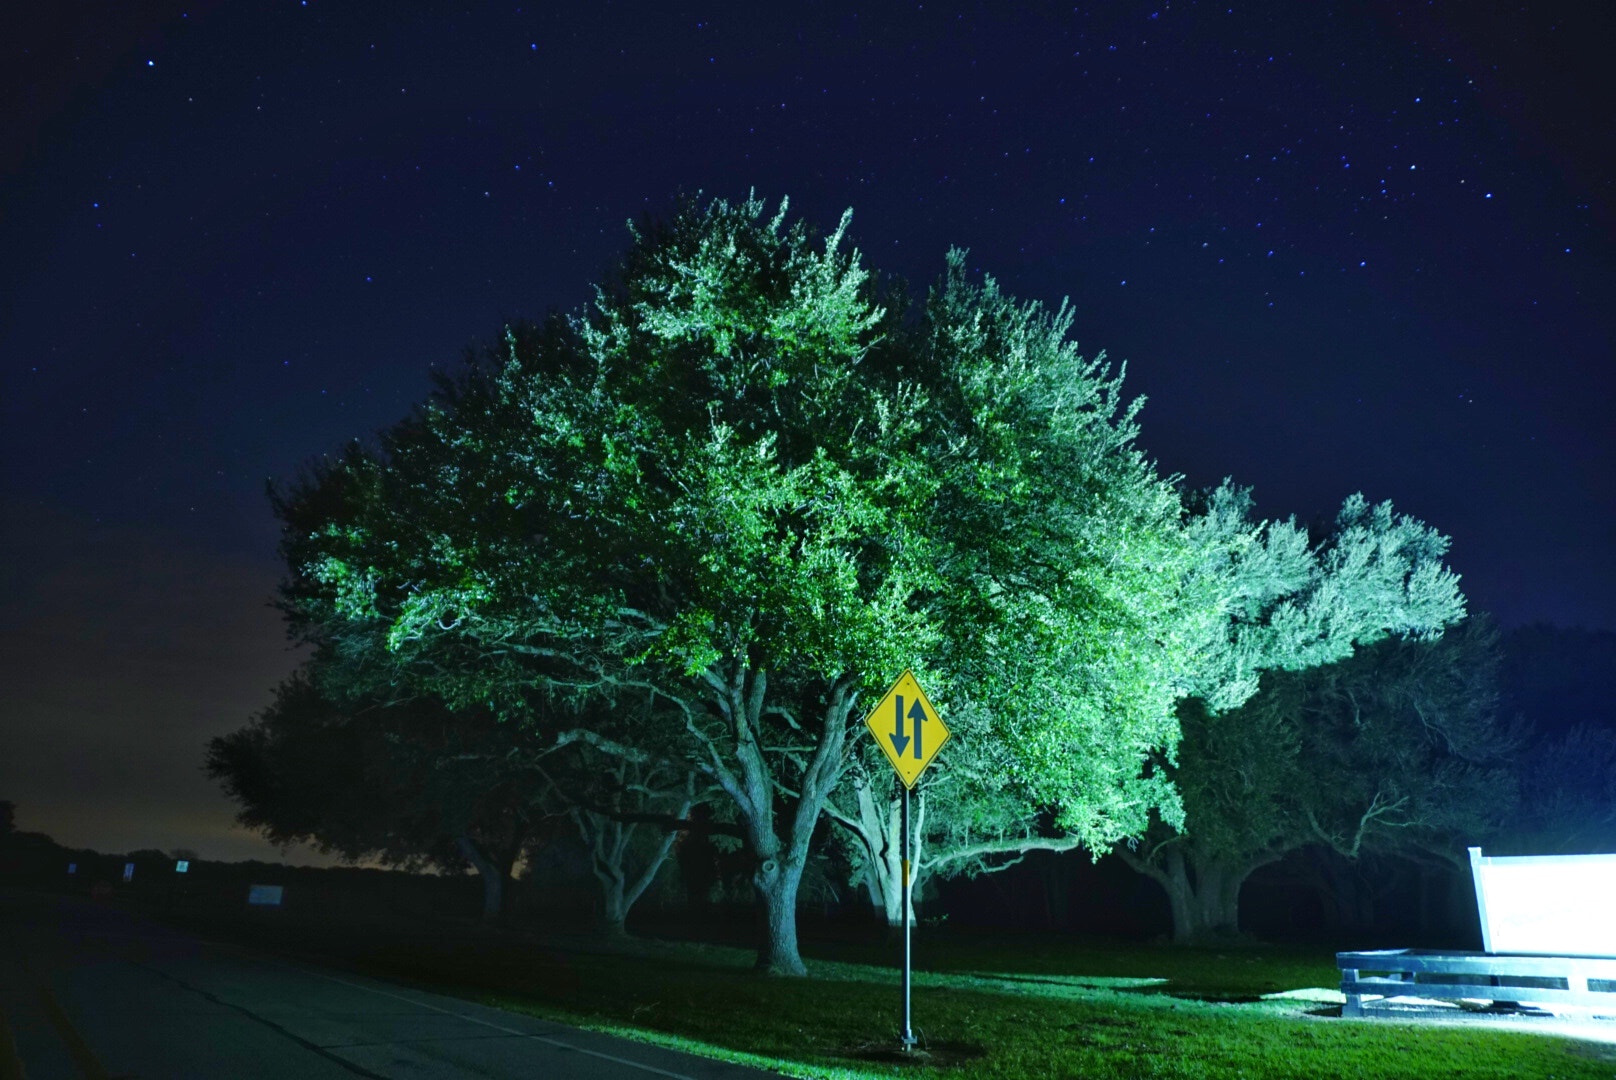 Sony a6300 sample photo. Just happy i got some stars. had to drive an hour  ... photography